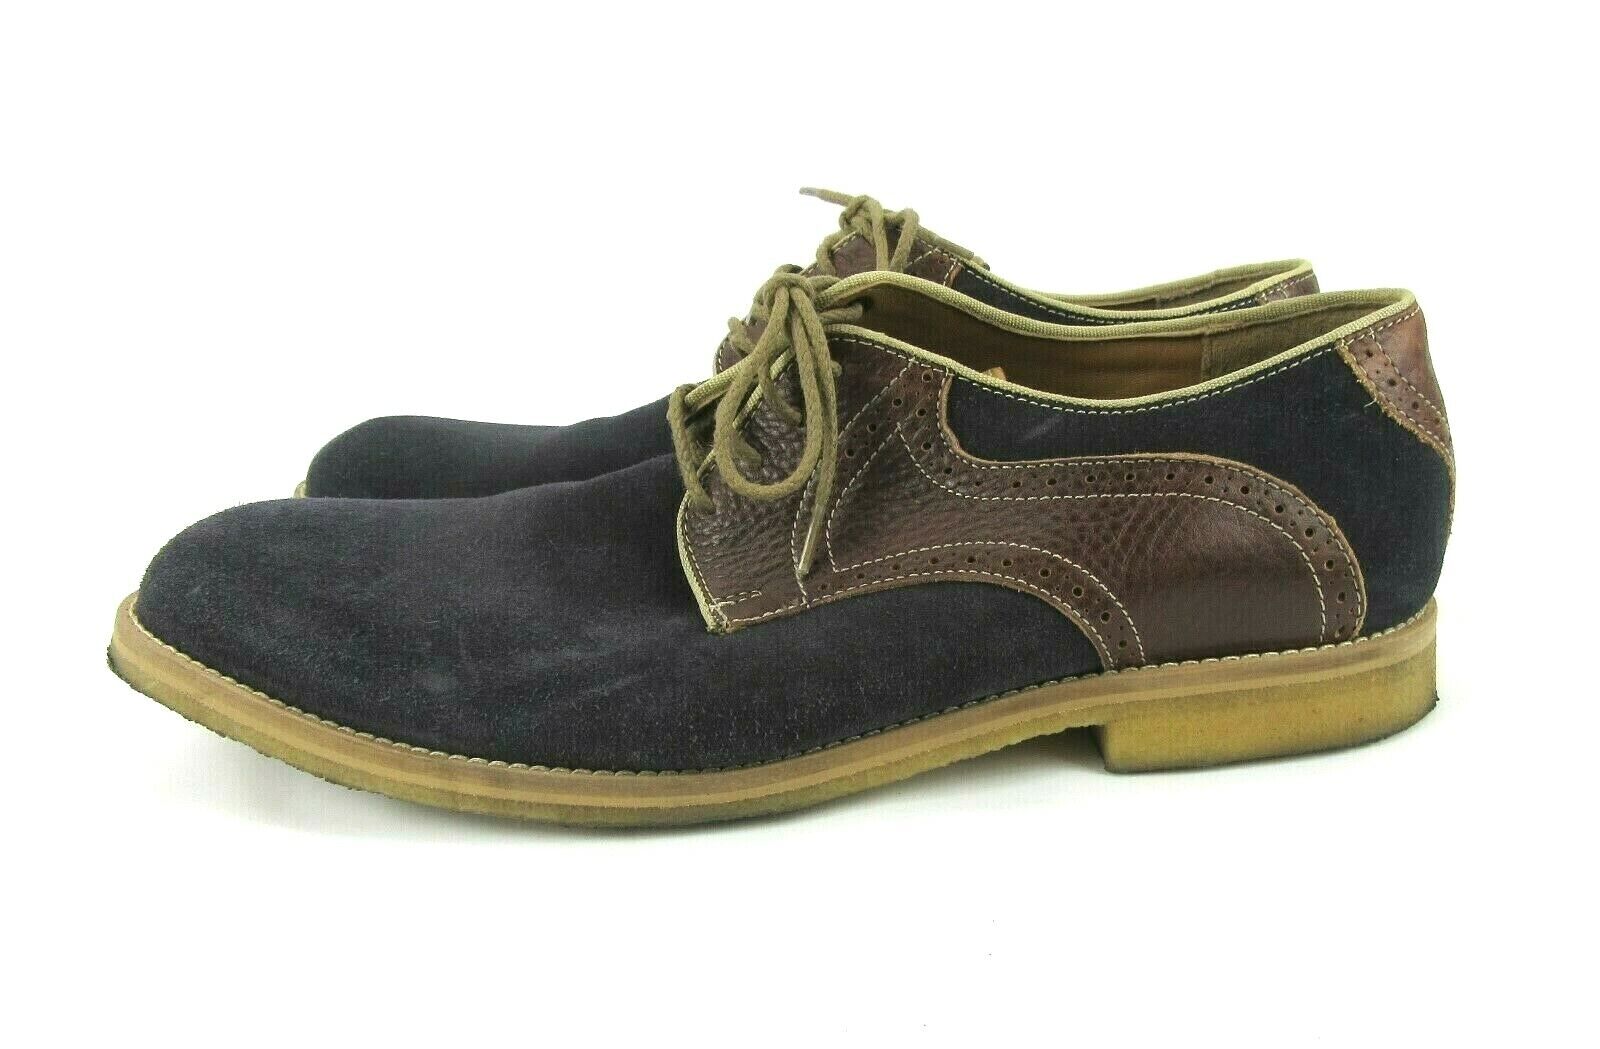 JOHNSTON MURPHY Sz supreme Max 53% OFF 12 M Saddle Blue Leather Brown Oxfords Suede